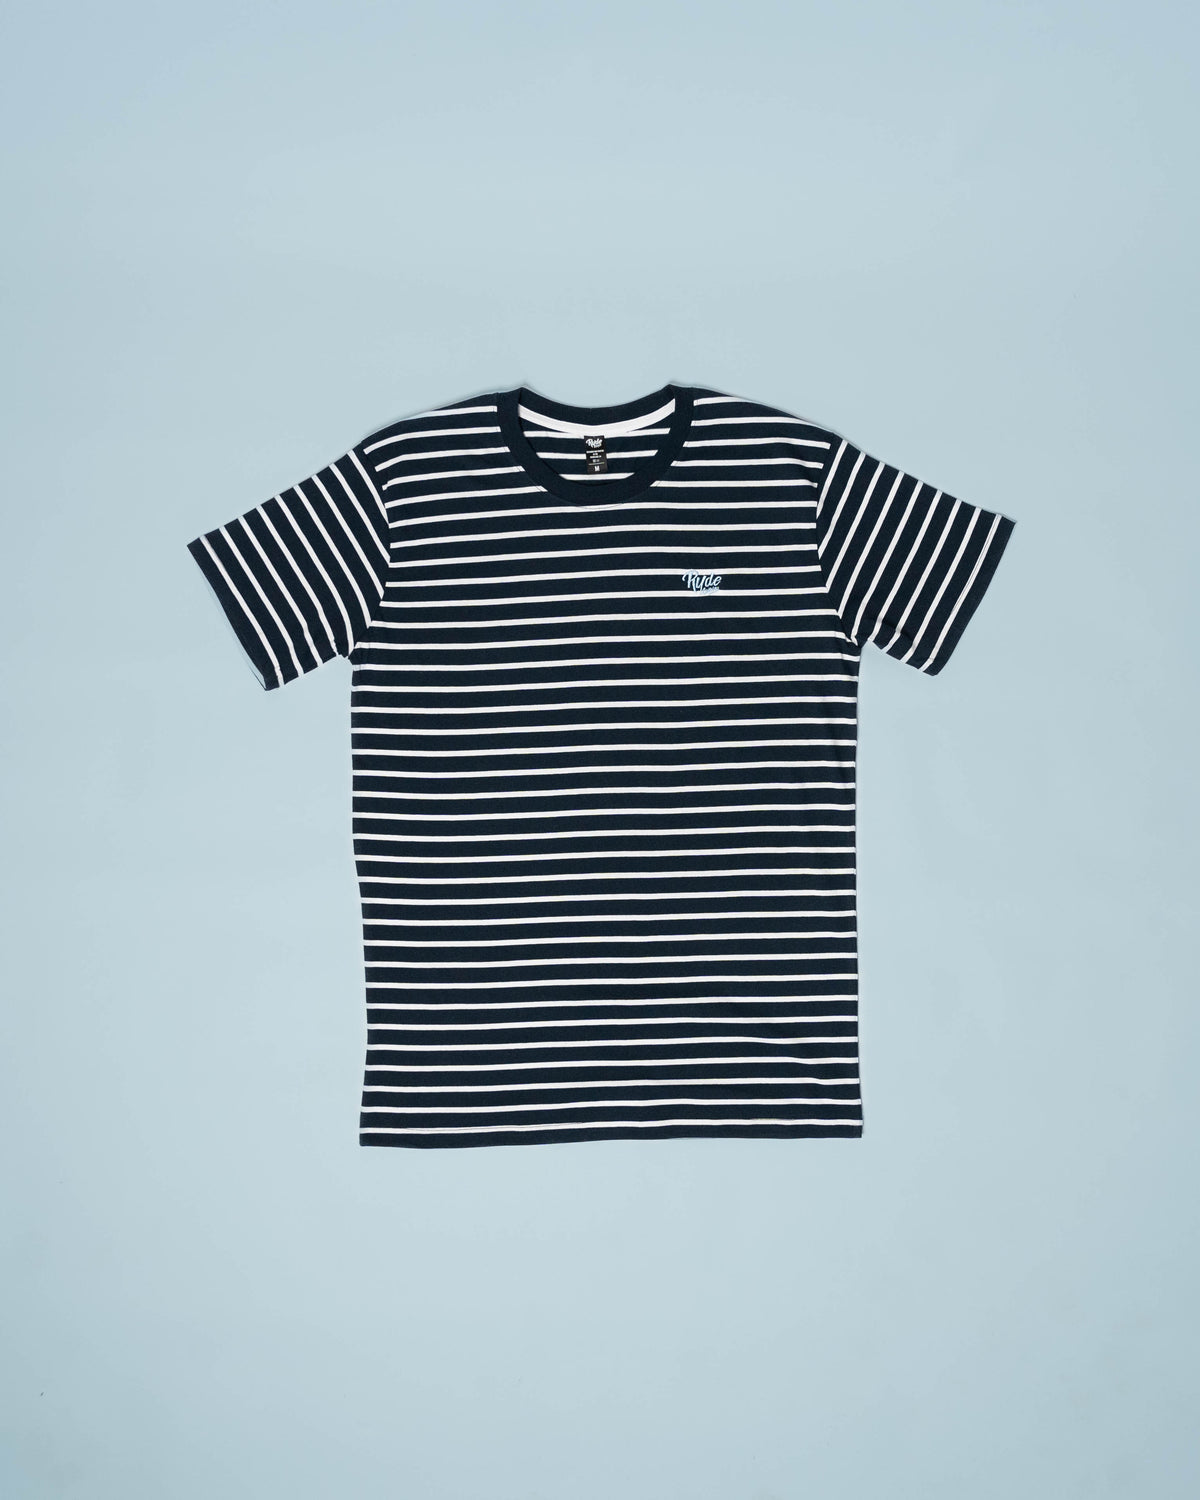 Ryde Embroidered Logo Navy Stripe Tee